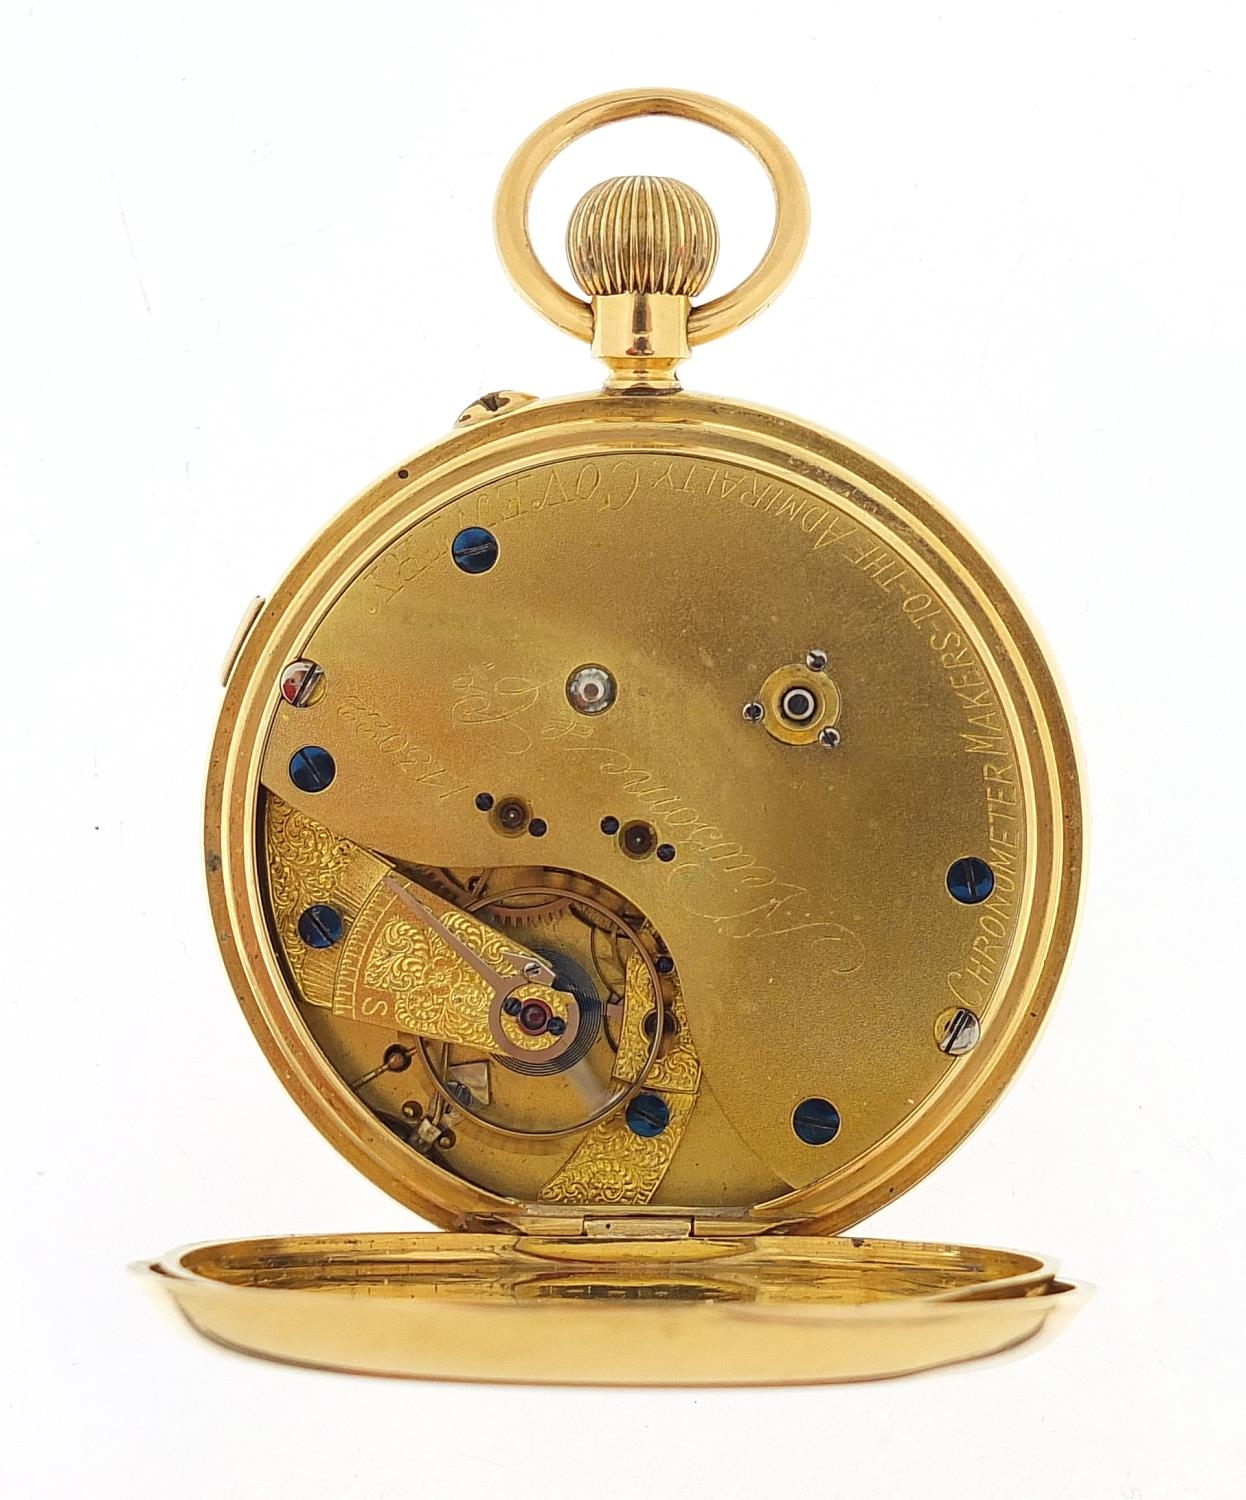 Newsome & Co Coventry, gentlemen's 18ct gold open face chronograph pocket watch with enamelled dial, - Image 2 of 5